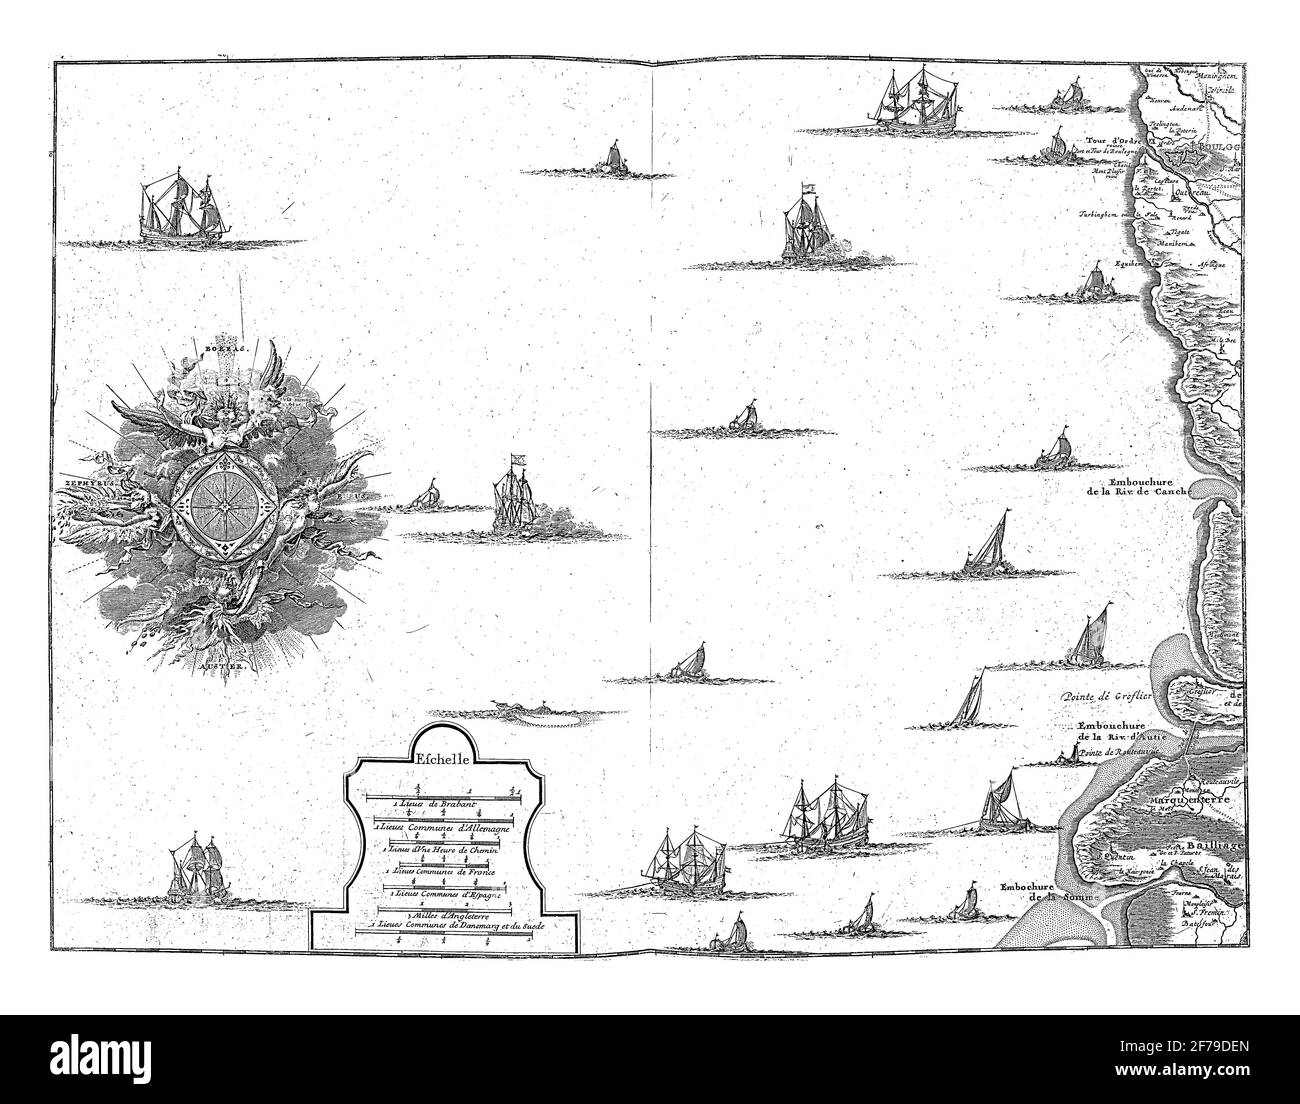 Map of the French coast at Boulogne and Picardy, vintage engraving ...